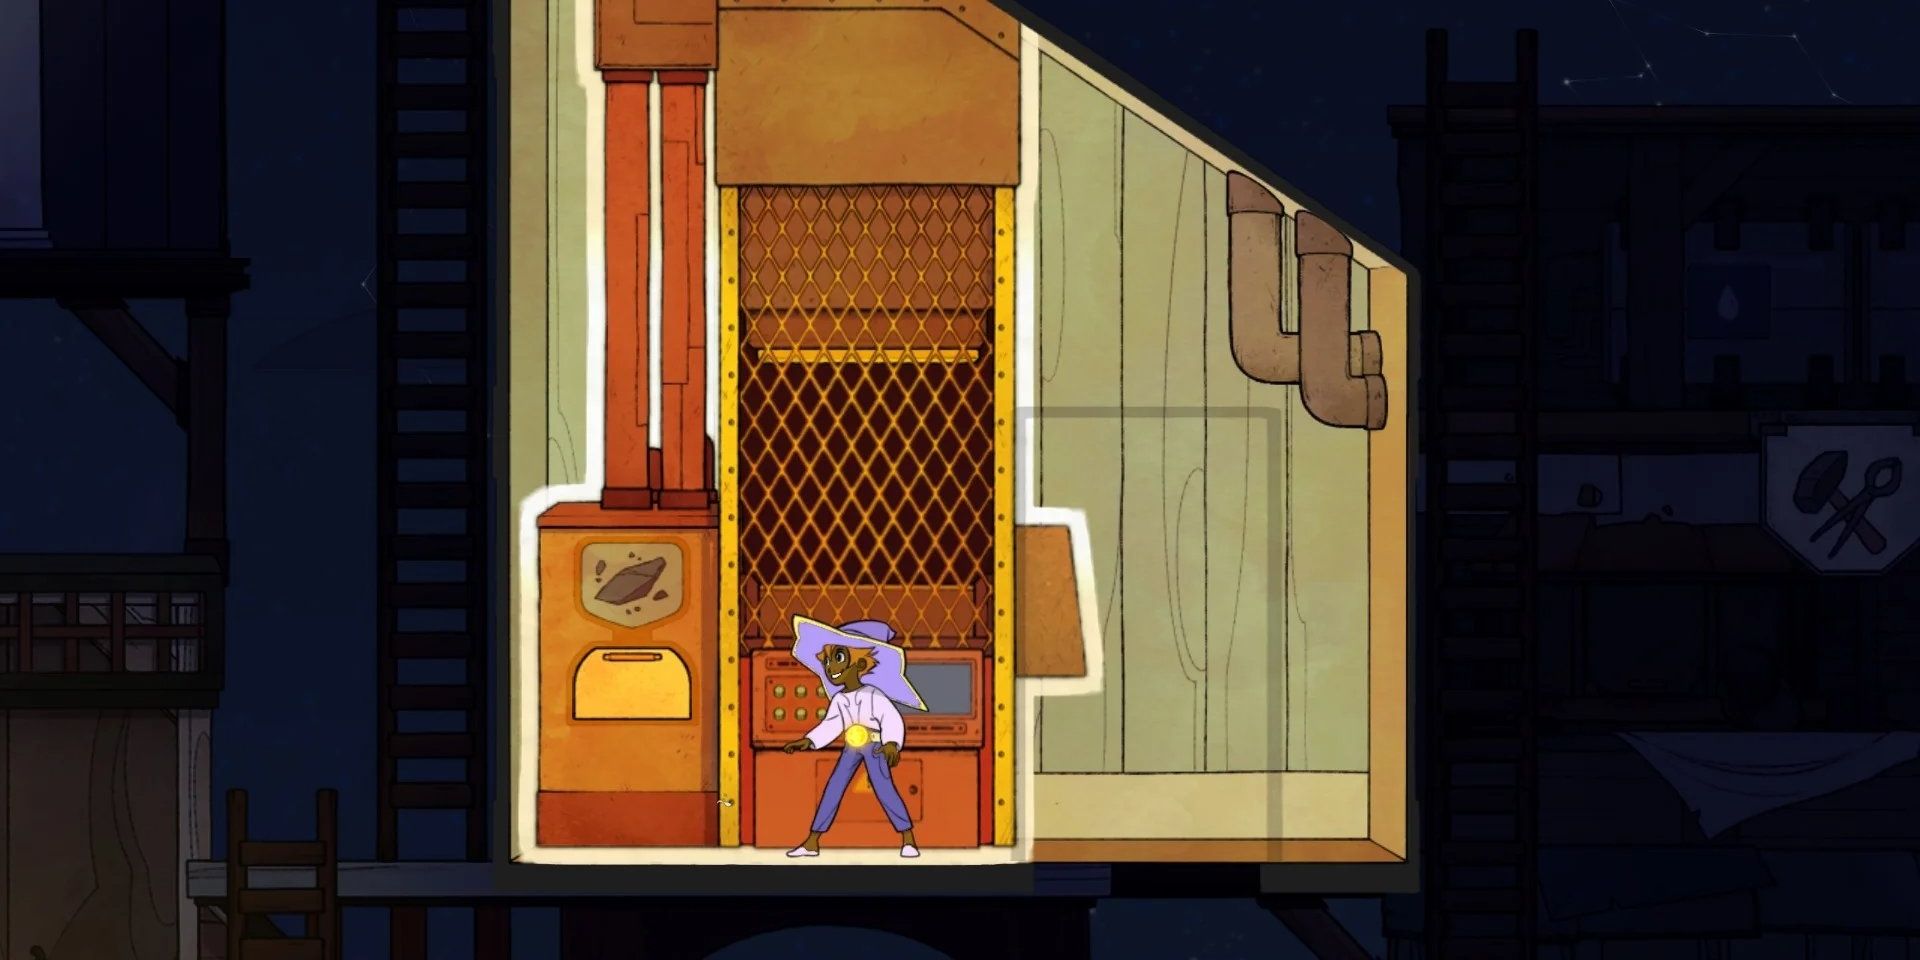 The player is standing in the Crusher building in Spiritfarer